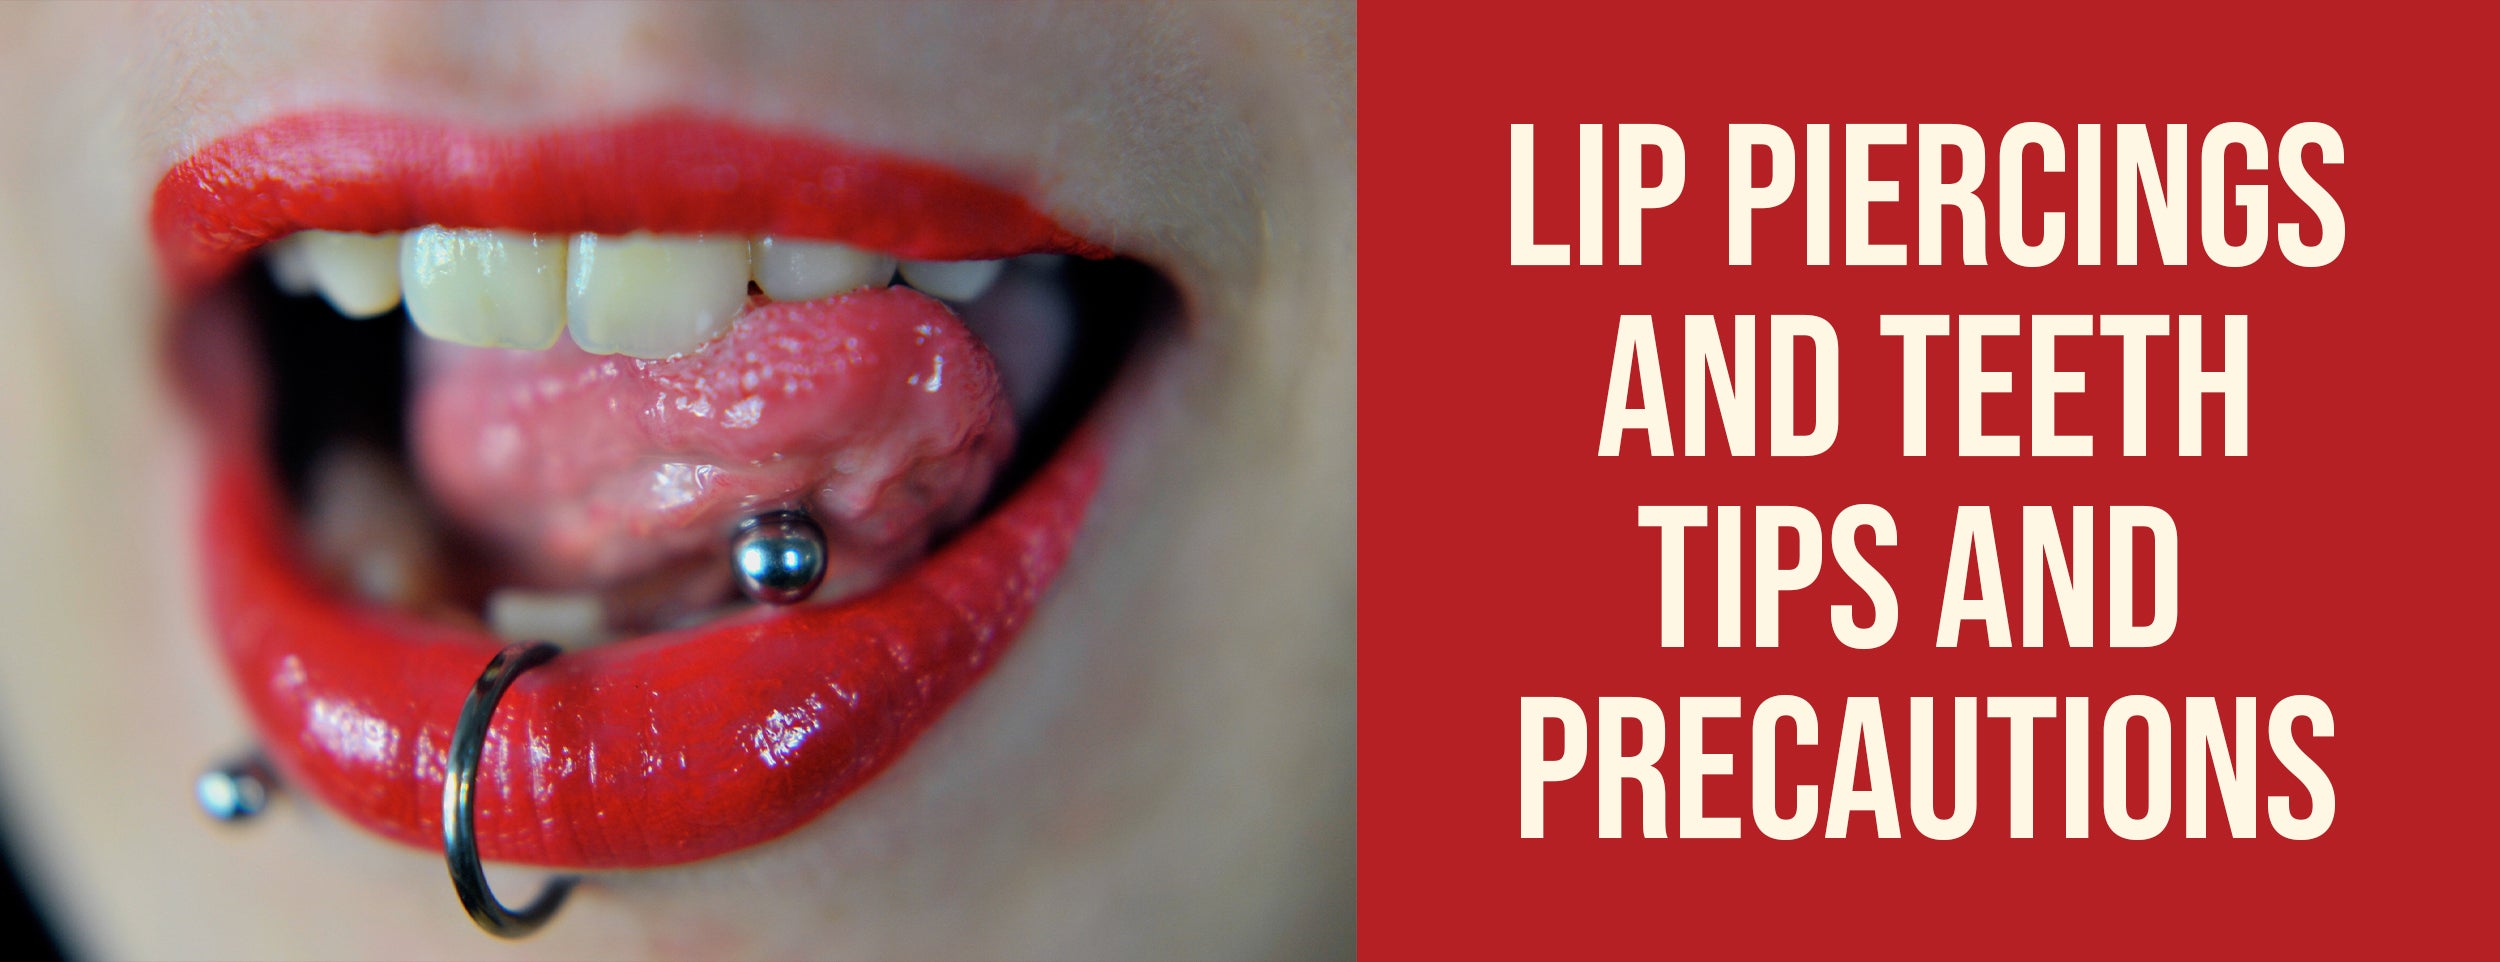 Tips and precautions for lip piercings and teeth